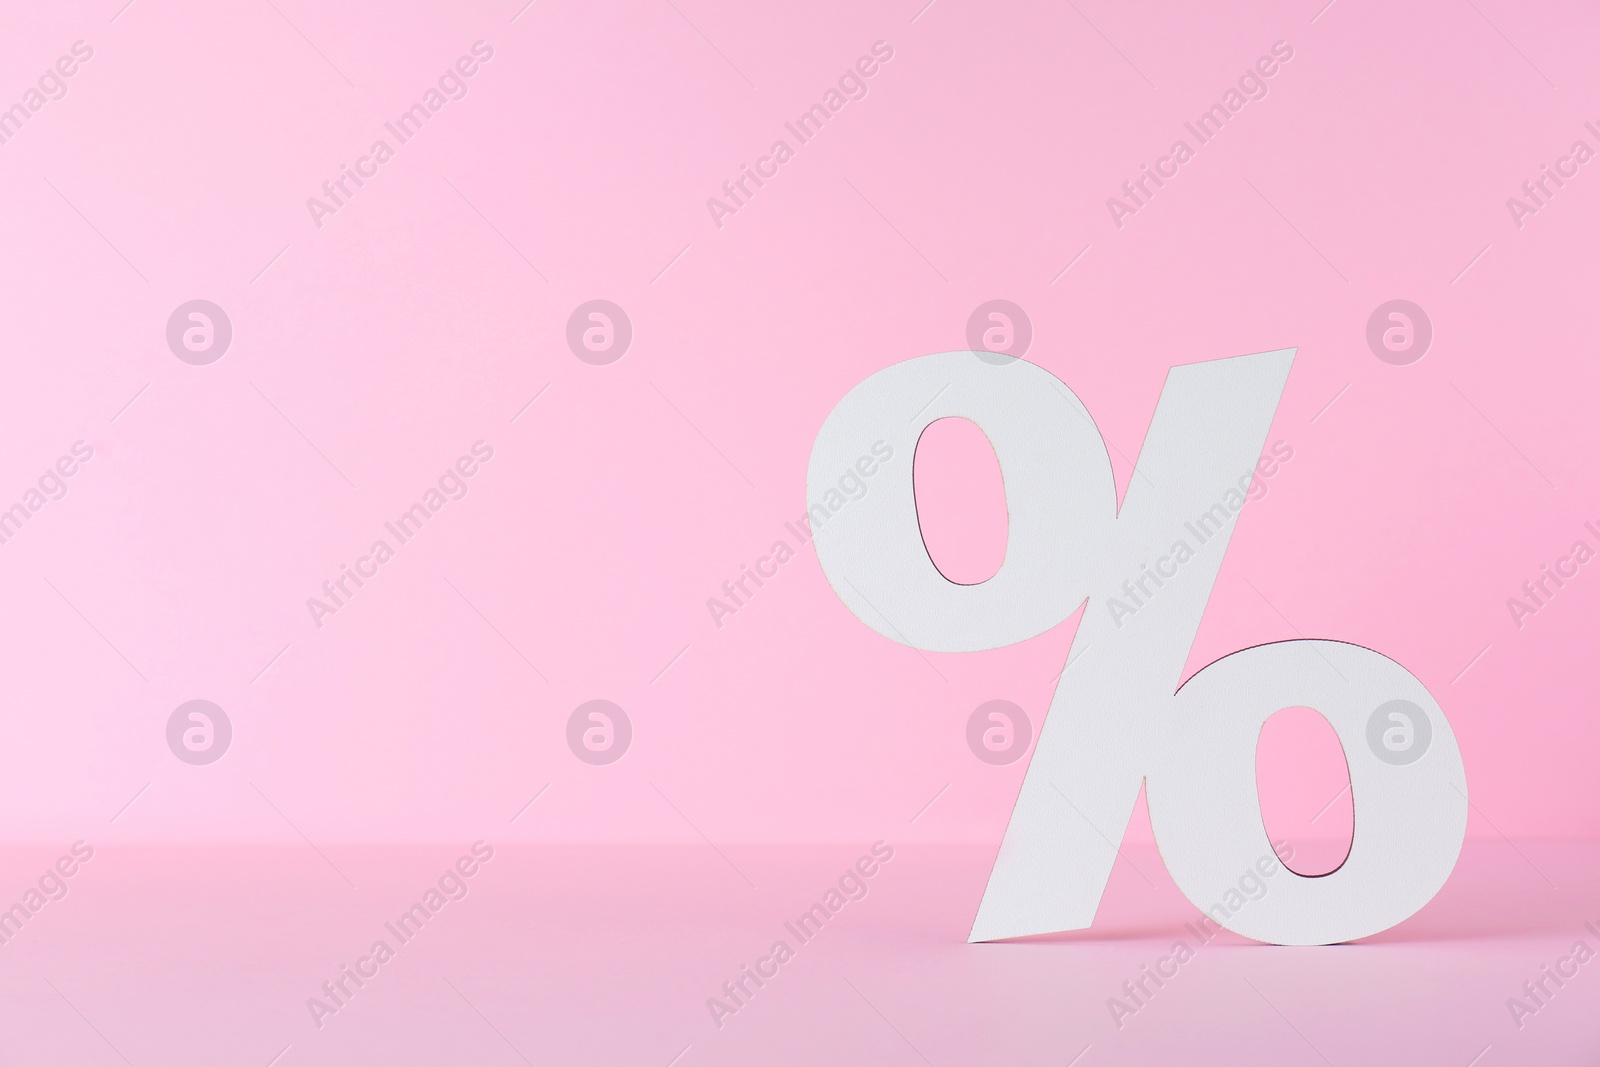 Photo of Paper percent symbol cutout on pink background. Space for text